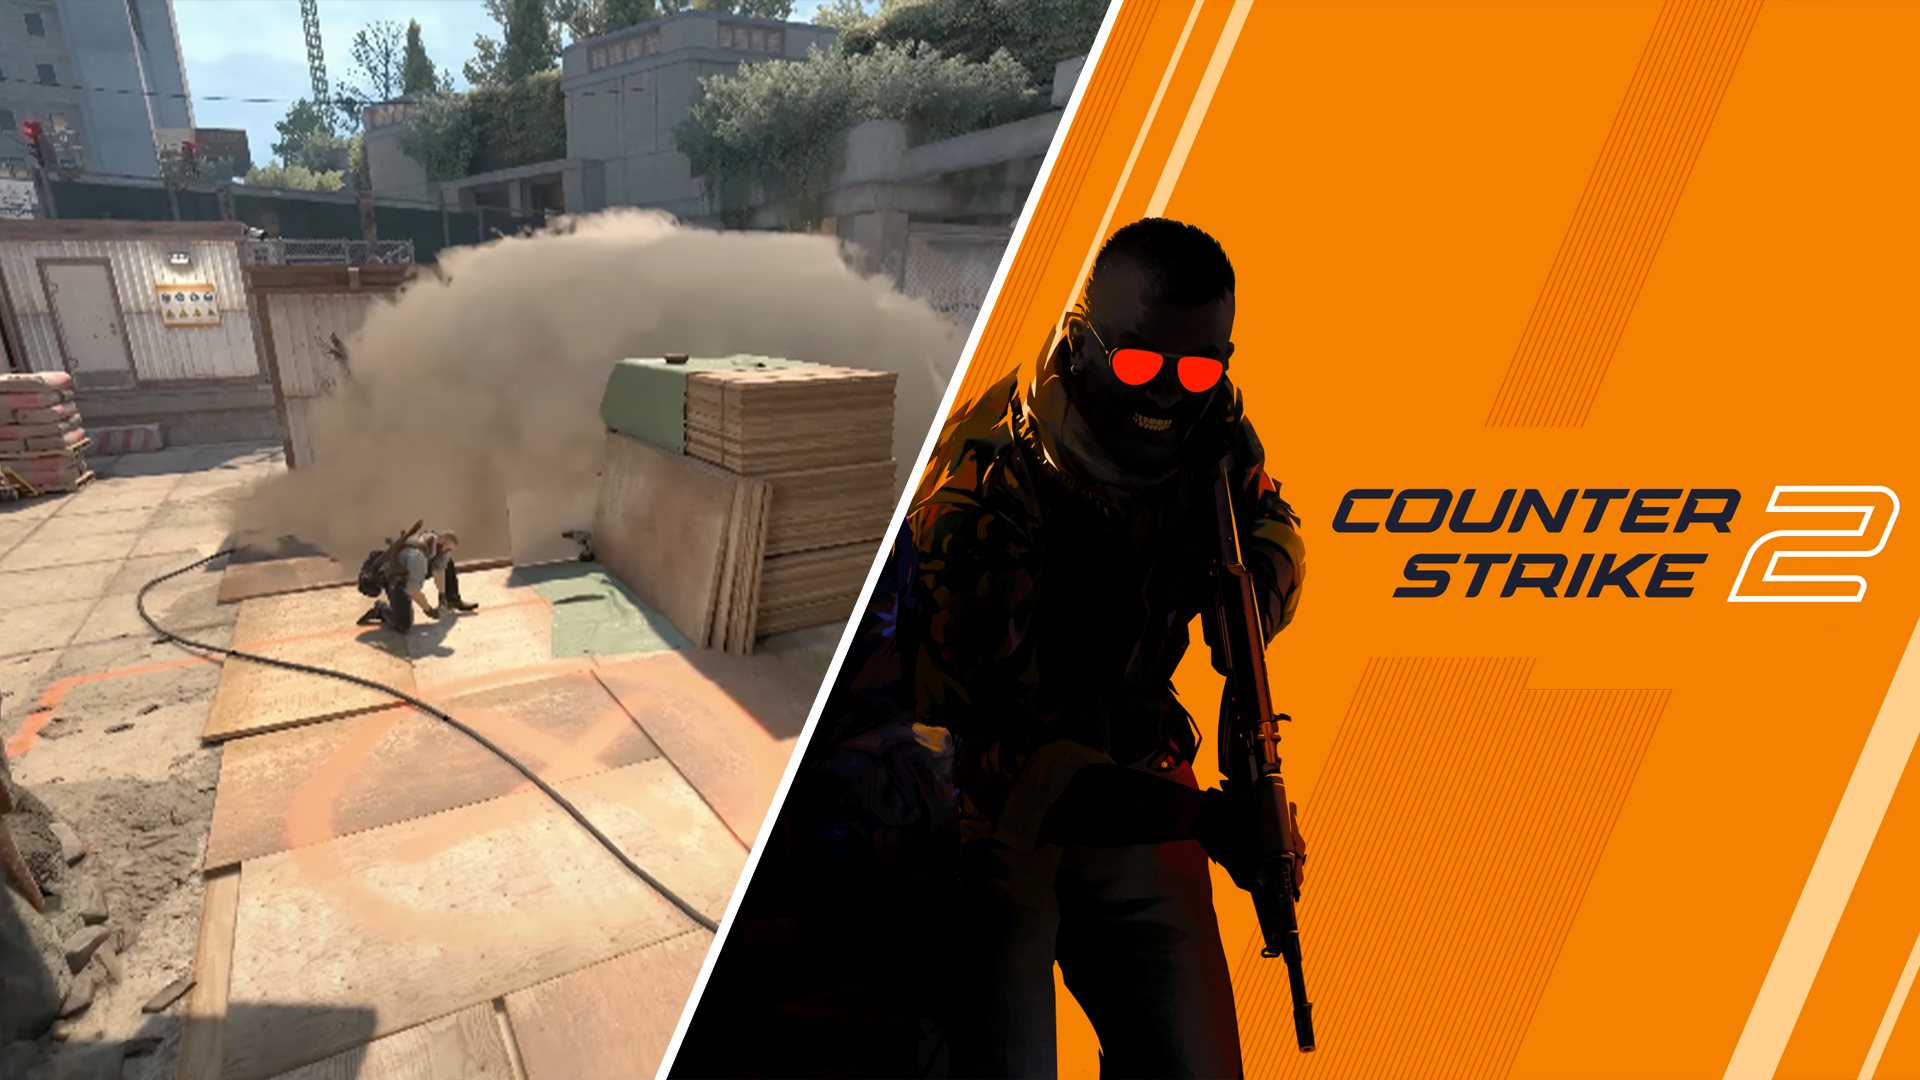 Counter-Strike 2's Release Date Has Been Teased by Valve